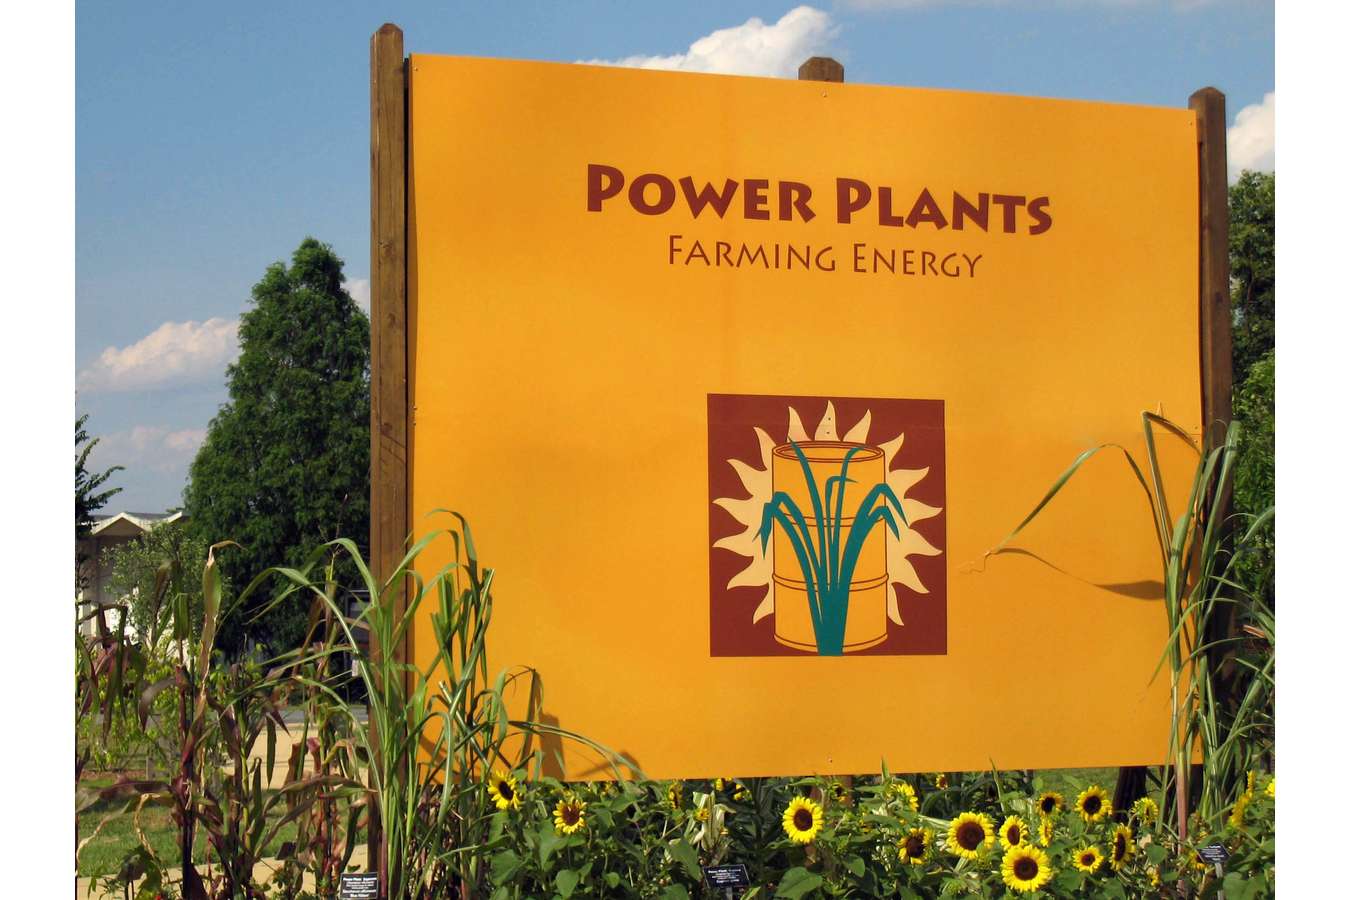 Display Graphics 17 : Triangular main entry to Power Plant display at National Arboretum each side different color